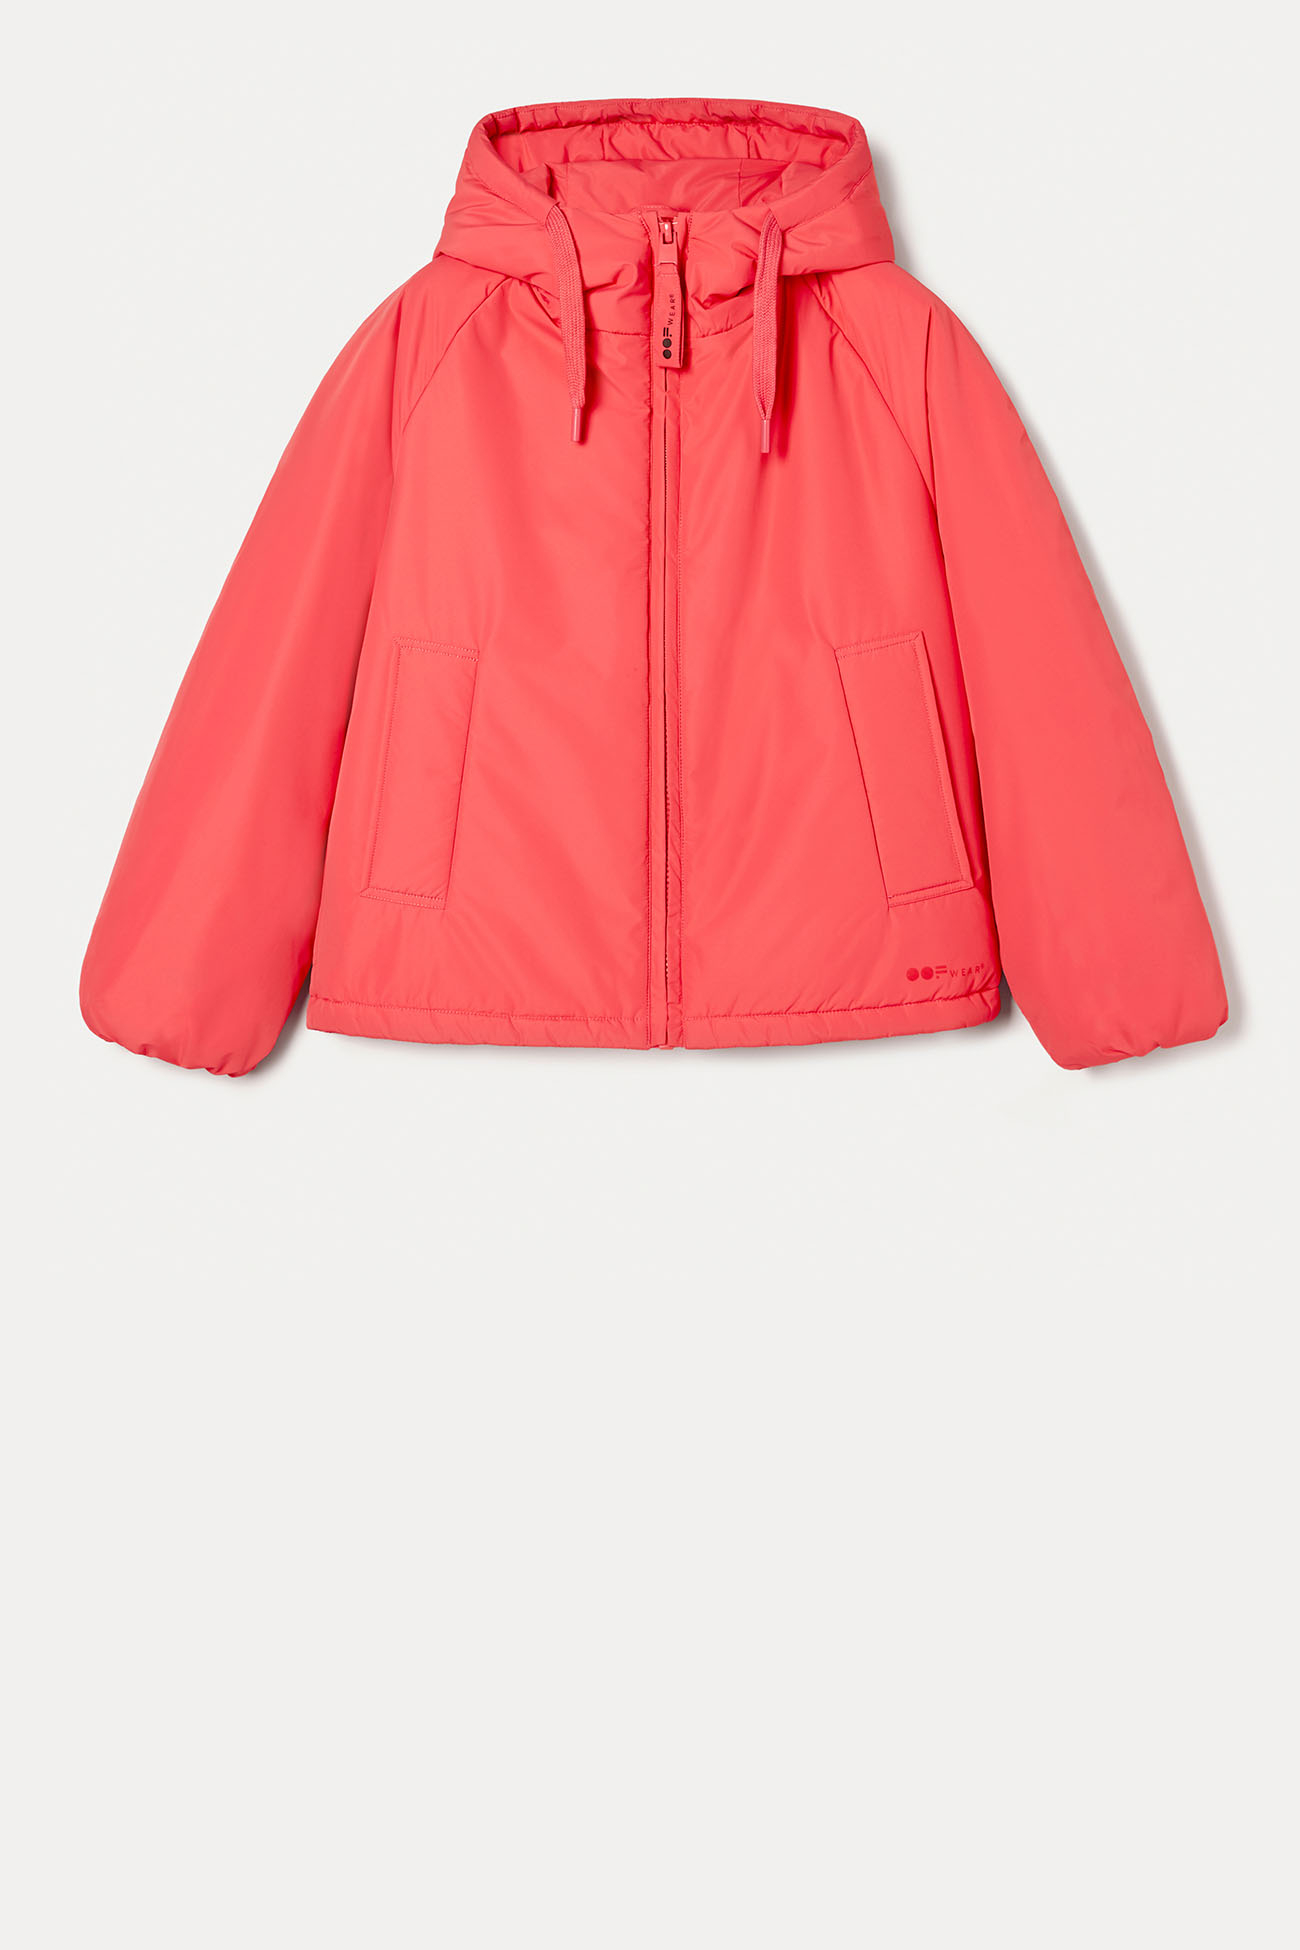 JACKET 9750 MADE IN NYLON - CORAL - OOF WEAR